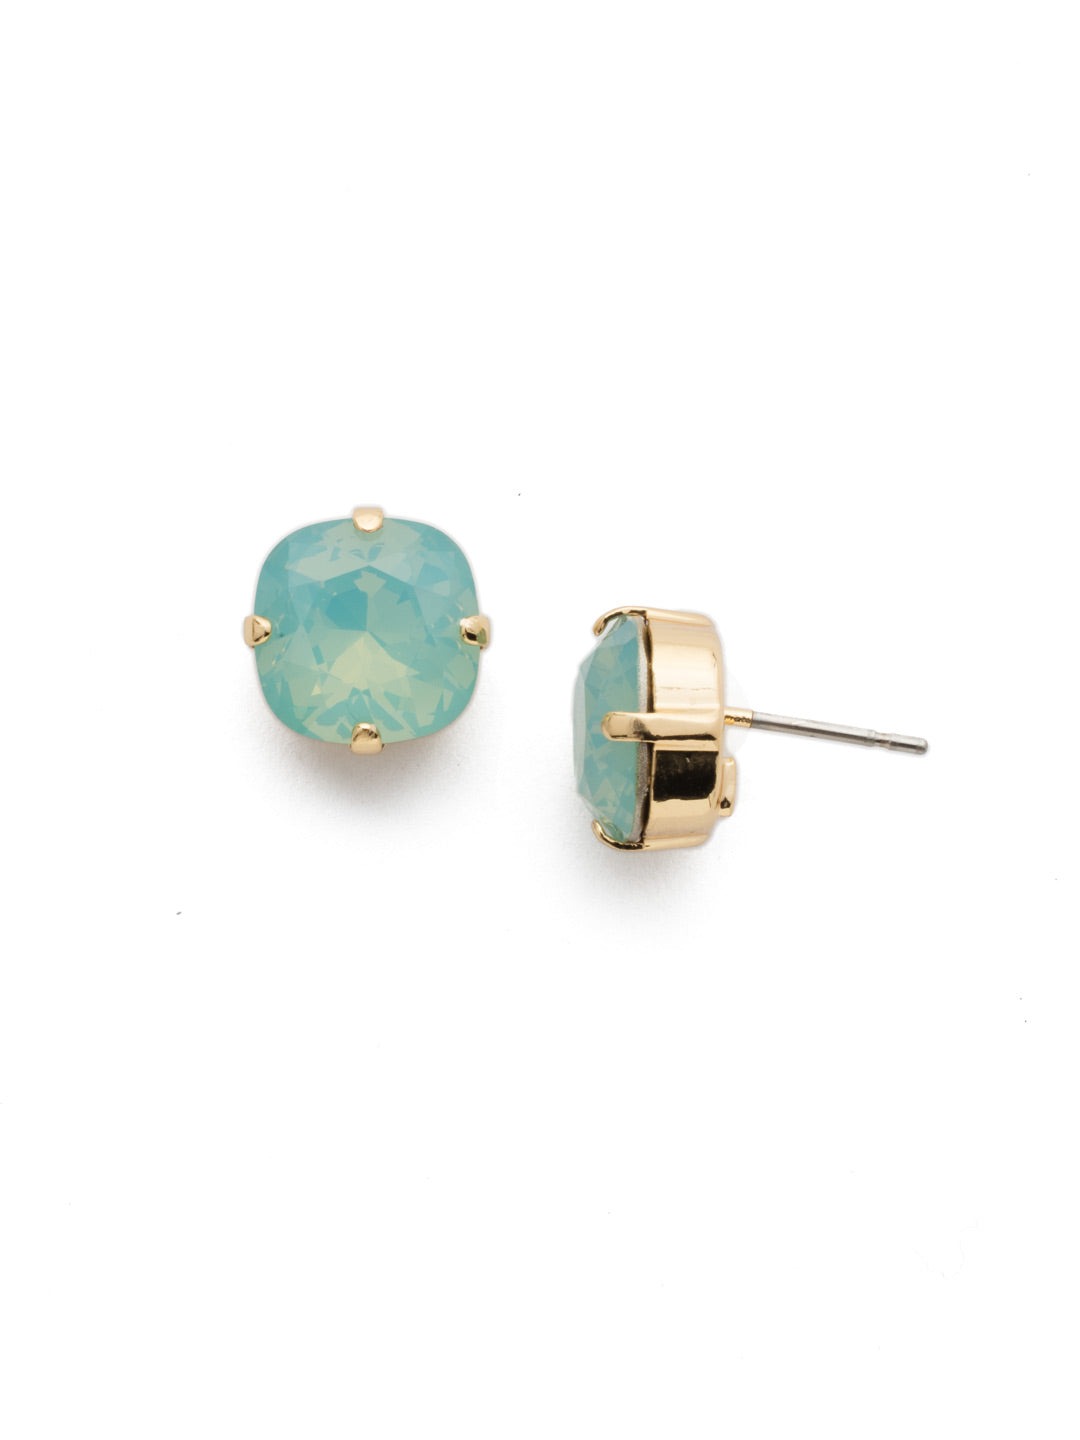 Halcyon Stud Earrings - EDH25BGPAC - <p>A beautiful, luminous cushion-cut crystal in a classic four-pronged setting that's ideal for everyday wear. From Sorrelli's Pacific Opal collection in our Bright Gold-tone finish.</p>